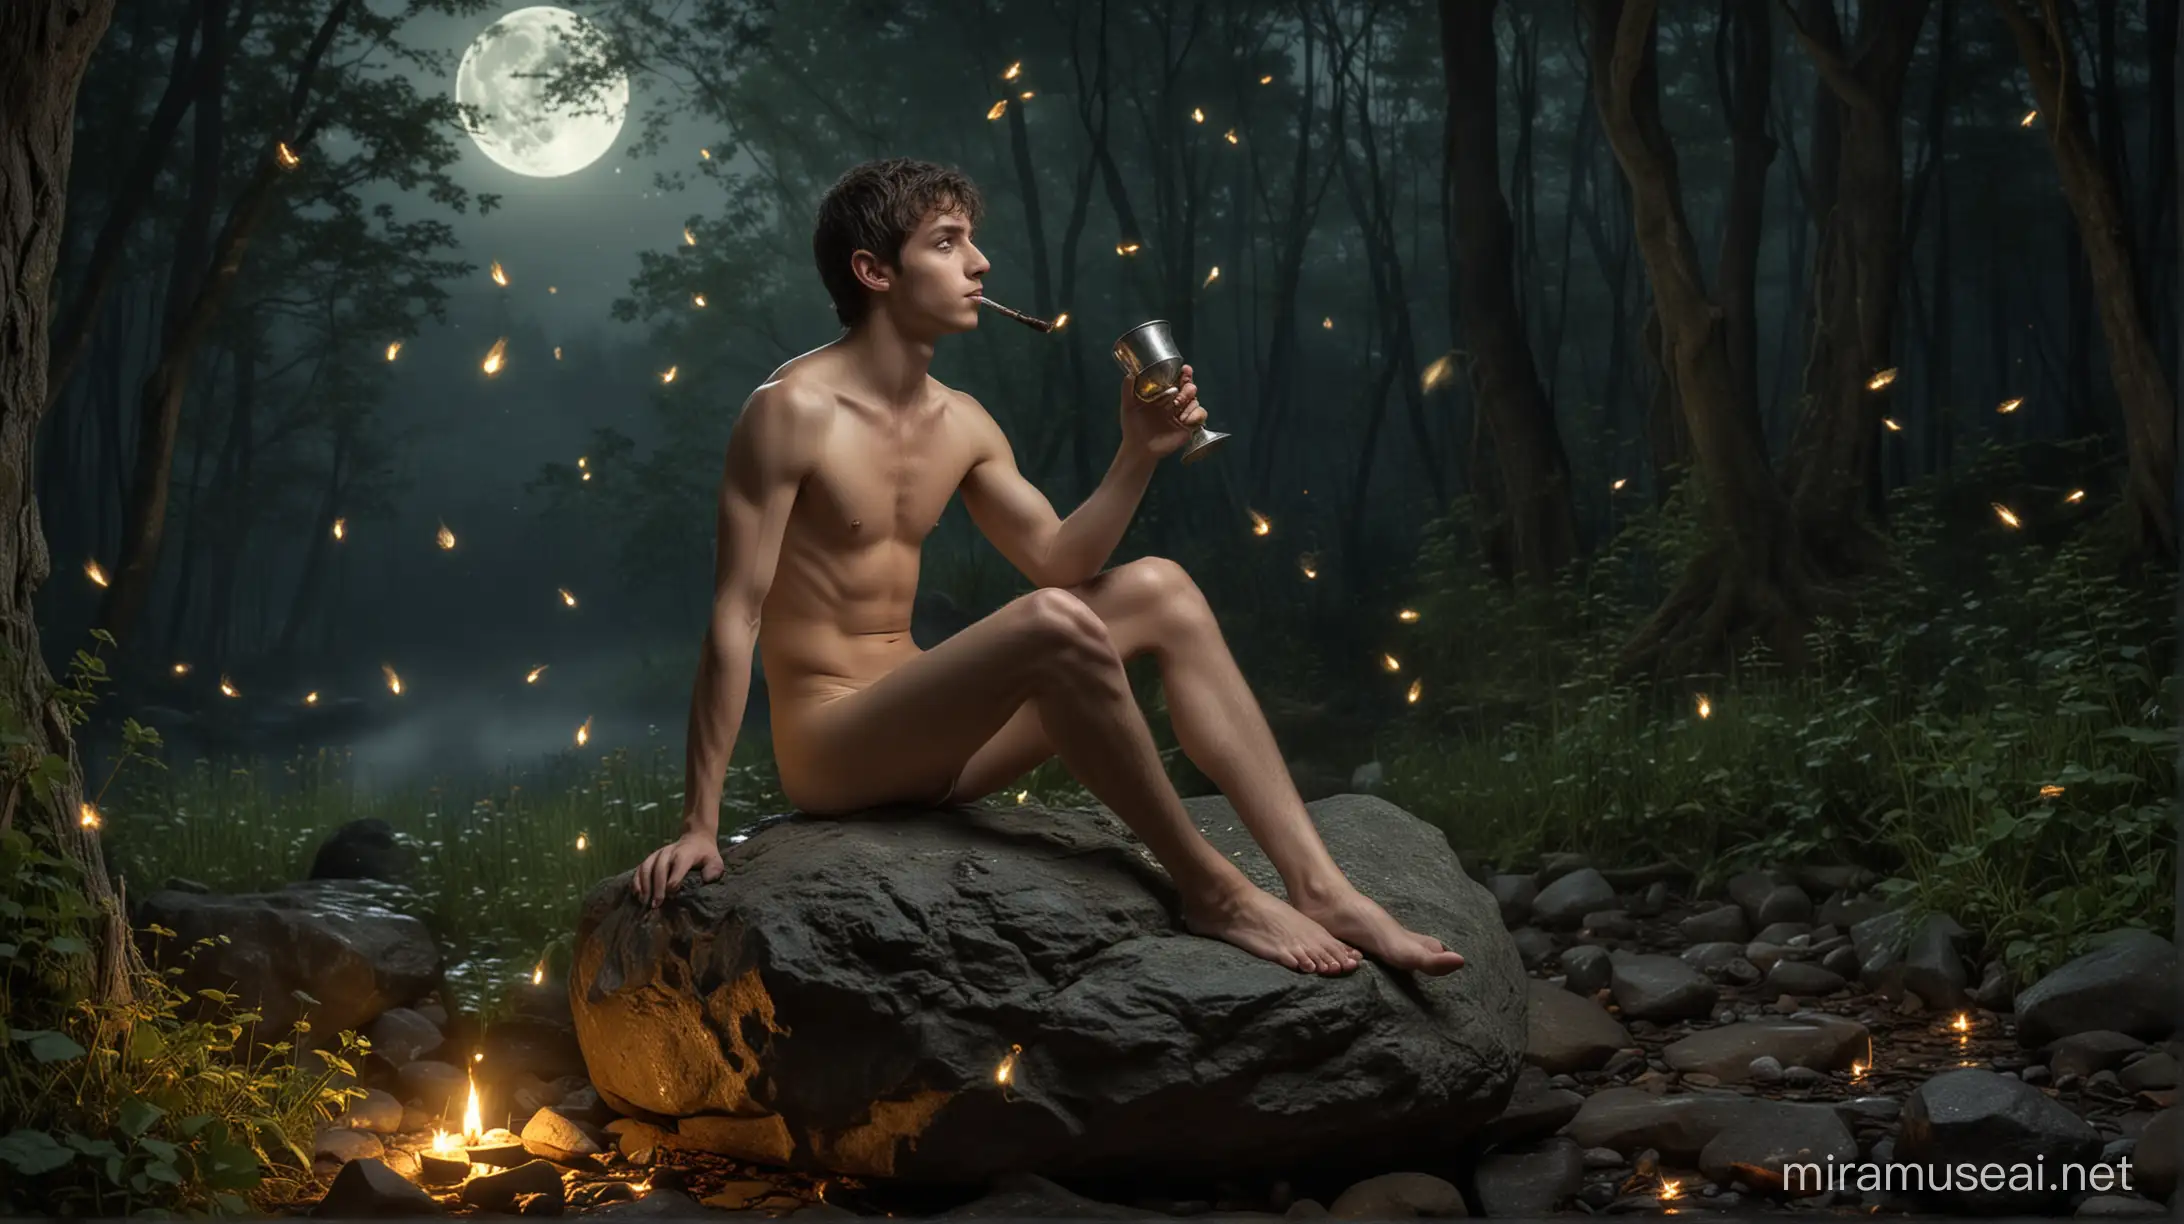 Naked Young Male Elf Sitting on Rock in Enchanted Forest Moonlight